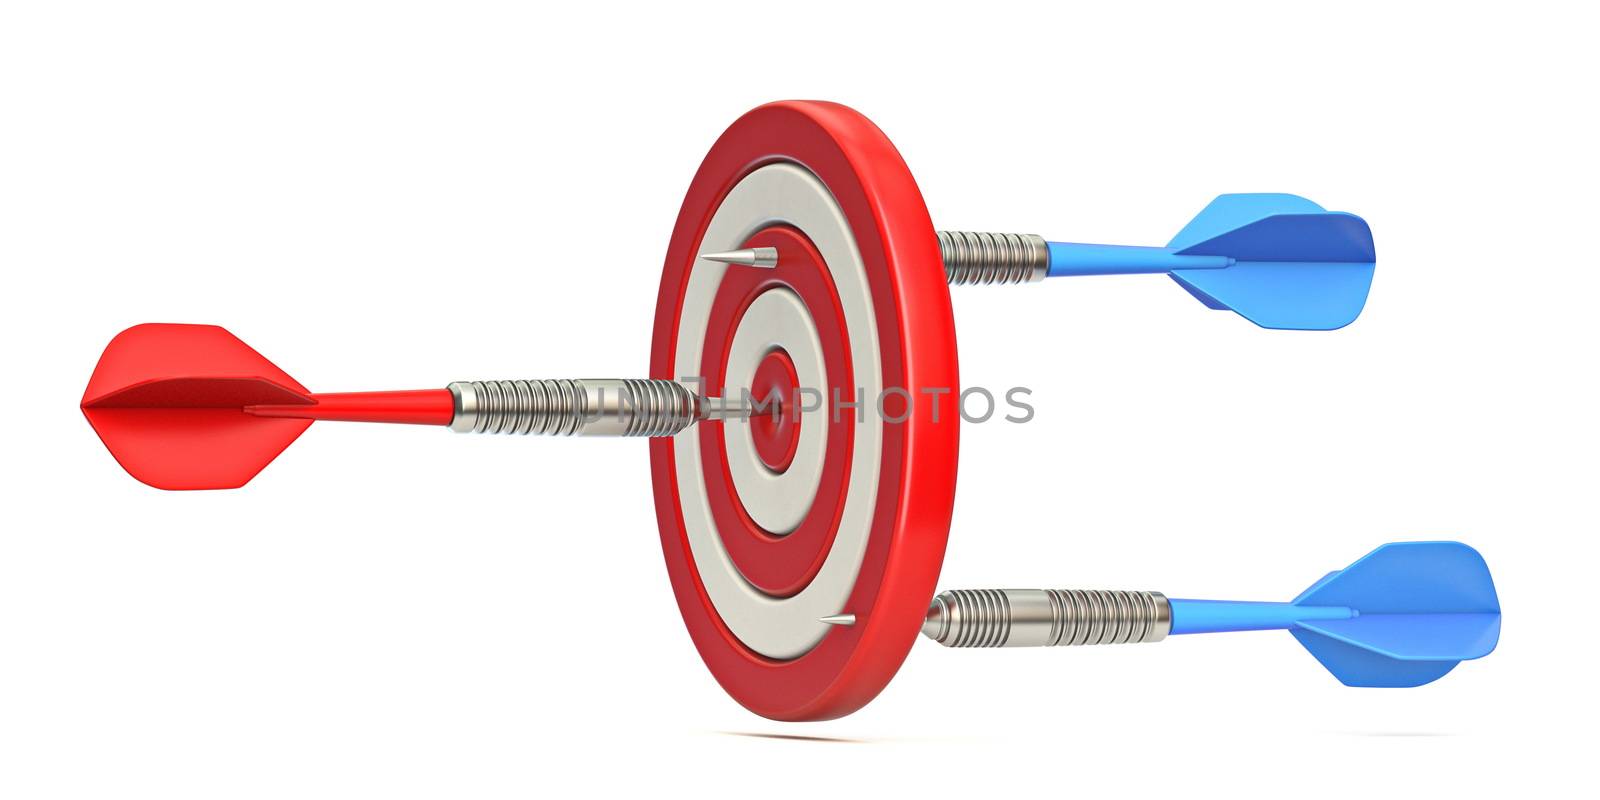 Dart hitting target from opposite sides 3D by djmilic